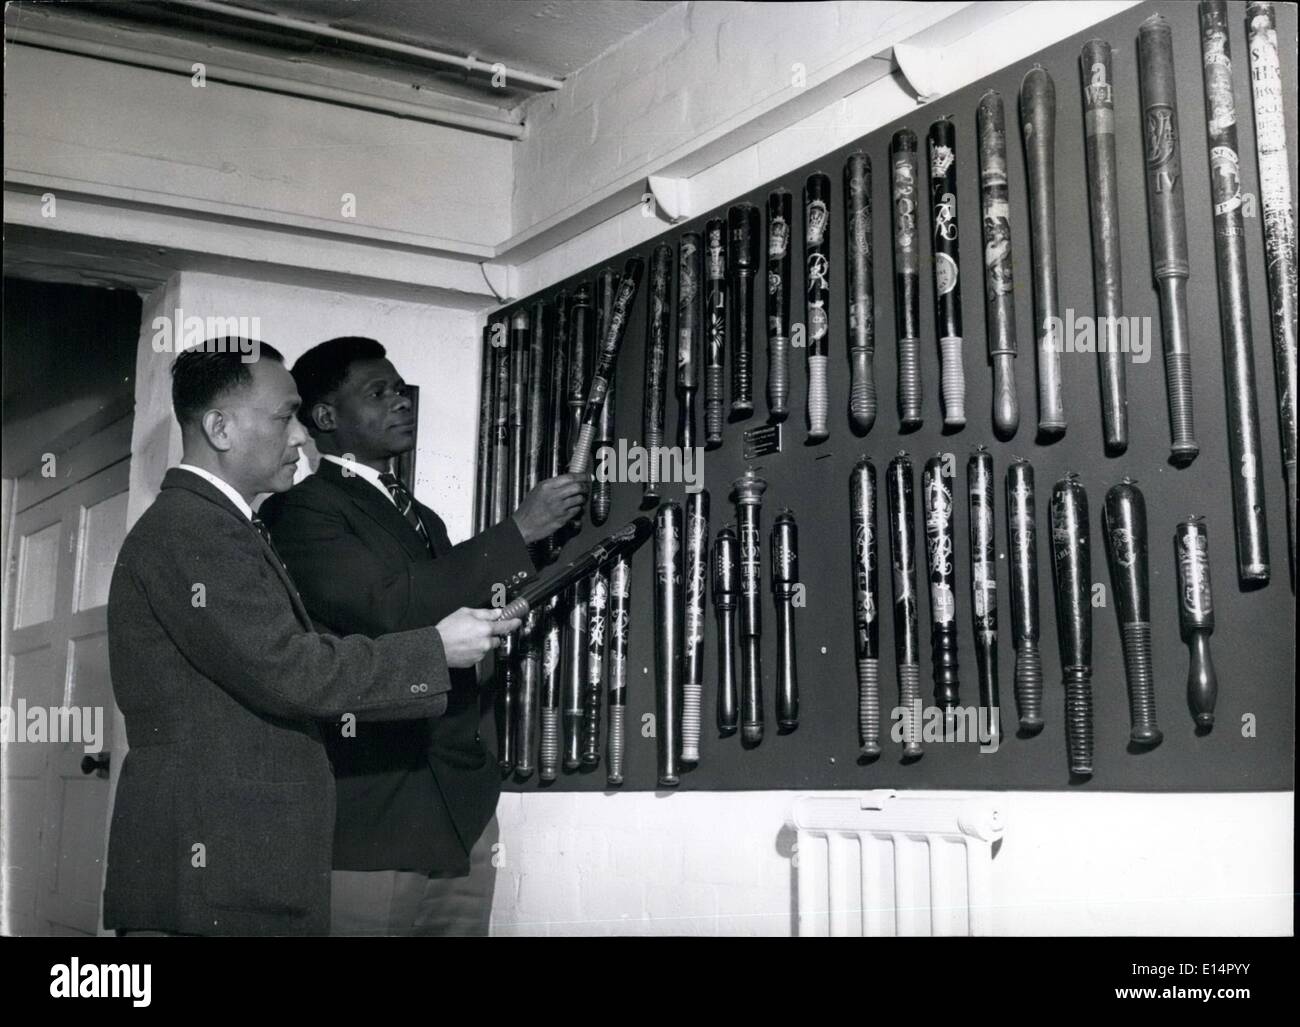 Apr. 18, 2012 - Chief Inspector Michael John of Sarawak (lef ) and Asst. Spt. Michael Henry tune of Nigeria examining a  interesting collection of truncheons in the Lounge. Stock Photo